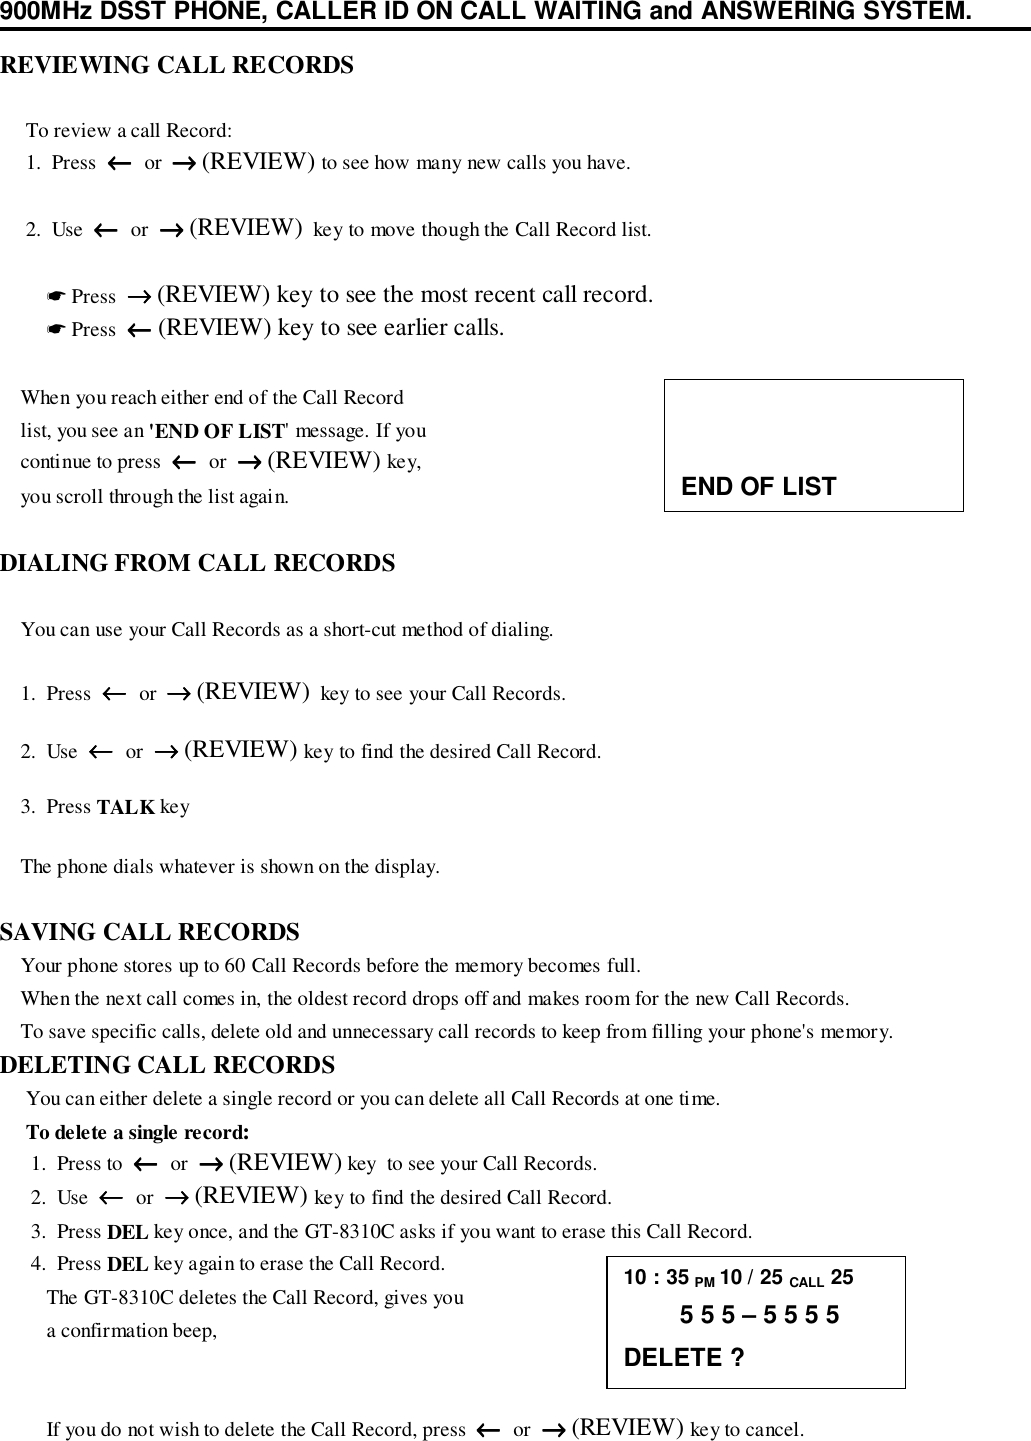 900MHz DSST PHONE, CALLER ID ON CALL WAITING and ANSWERING SYSTEM.REVIEWING CALL RECORDS     To review a call Record:     1.  Press  ←←←←  or  →→→→ (REVIEW) to see how many new calls you have.     2.  Use  ←←←←  or  →→→→ (REVIEW)  key to move though the Call Record list.         ☛ Press  →→→→ (REVIEW) key to see the most recent call record.         ☛ Press  ←←←← (REVIEW) key to see earlier calls.    When you reach either end of the Call Record    list, you see an &apos;END OF LIST&apos; message. If you    continue to press  ←←←←  or  →→→→ (REVIEW) key,    you scroll through the list again.DIALING FROM CALL RECORDS    You can use your Call Records as a short-cut method of dialing.    1.  Press  ←←←←  or  →→→→ (REVIEW)  key to see your Call Records.    2.  Use  ←←←←  or  →→→→ (REVIEW) key to find the desired Call Record.    3.  Press TALK key    The phone dials whatever is shown on the display.SAVING CALL RECORDS    Your phone stores up to 60 Call Records before the memory becomes full.    When the next call comes in, the oldest record drops off and makes room for the new Call Records.    To save specific calls, delete old and unnecessary call records to keep from filling your phone&apos;s memory.DELETING CALL RECORDS     You can either delete a single record or you can delete all Call Records at one time.     To delete a single record:      1.  Press to  ←←←←  or  →→→→ (REVIEW) key  to see your Call Records.      2.  Use  ←←←←  or  →→→→ (REVIEW) key to find the desired Call Record.      3.  Press DEL key once, and the GT-8310C asks if you want to erase this Call Record.      4.  Press DEL key again to erase the Call Record.         The GT-8310C deletes the Call Record, gives you         a confirmation beep,         If you do not wish to delete the Call Record, press  ←←←←  or  →→→→ (REVIEW) key to cancel.END OF LIST10 : 35 PM 10 / 25 CALL 25        5 5 5 – 5 5 5 5DELETE ?